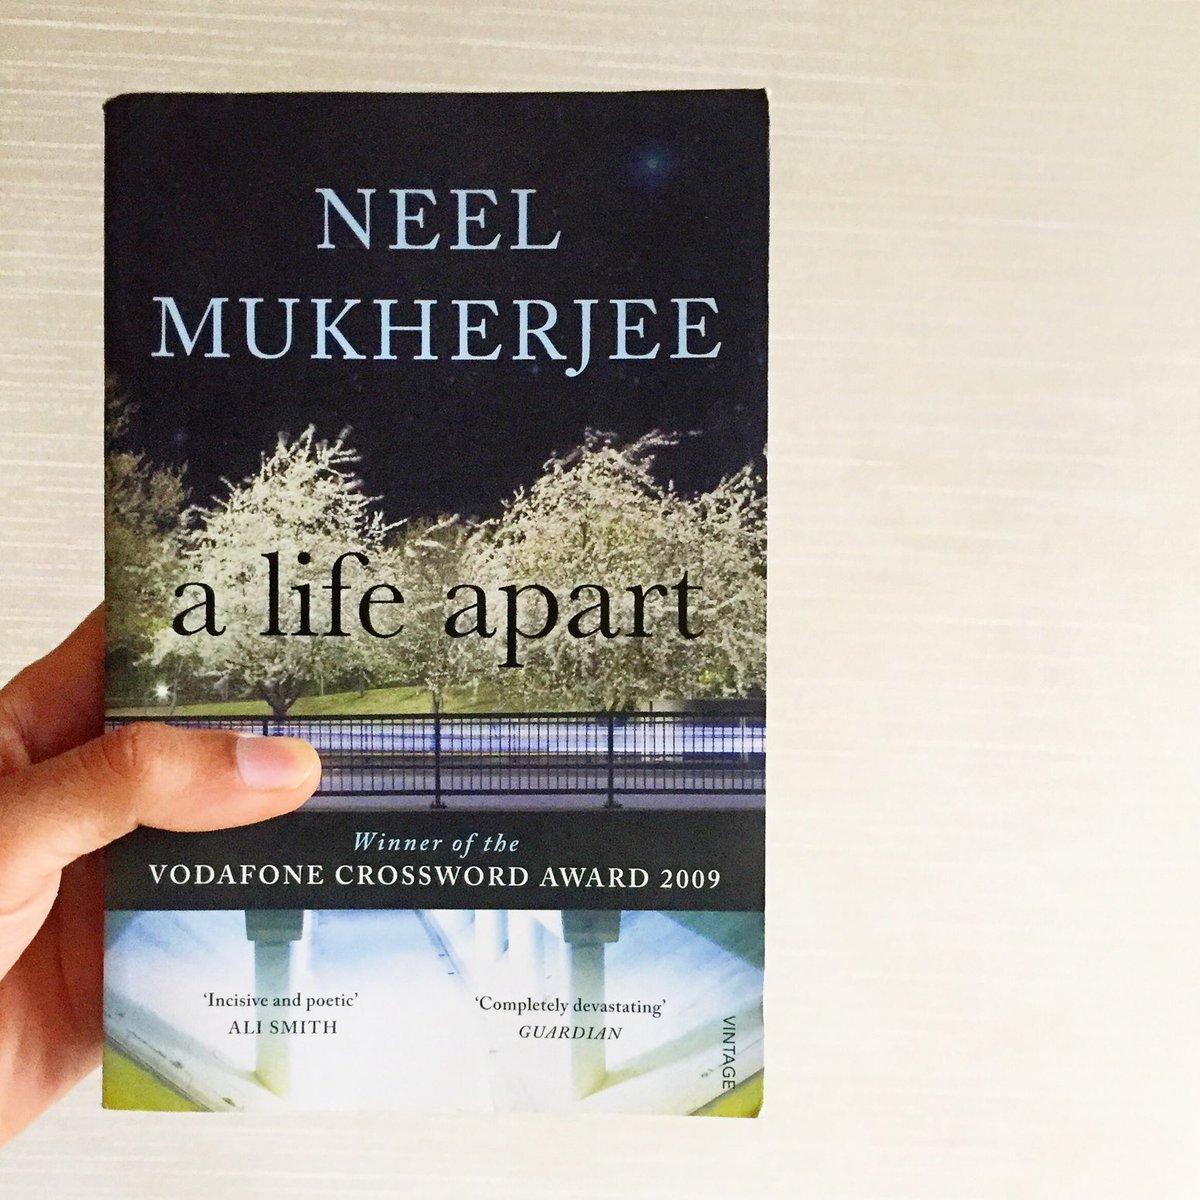 My review of #NeelMukherjee’s “A Life Apart” (first published in India as “Past Continuous”), which narrates the parallel stories of two individuals experiencing the anxieties and possibilities of cultural dislocation: instagram.com/p/CcX3g7uD2B4/…